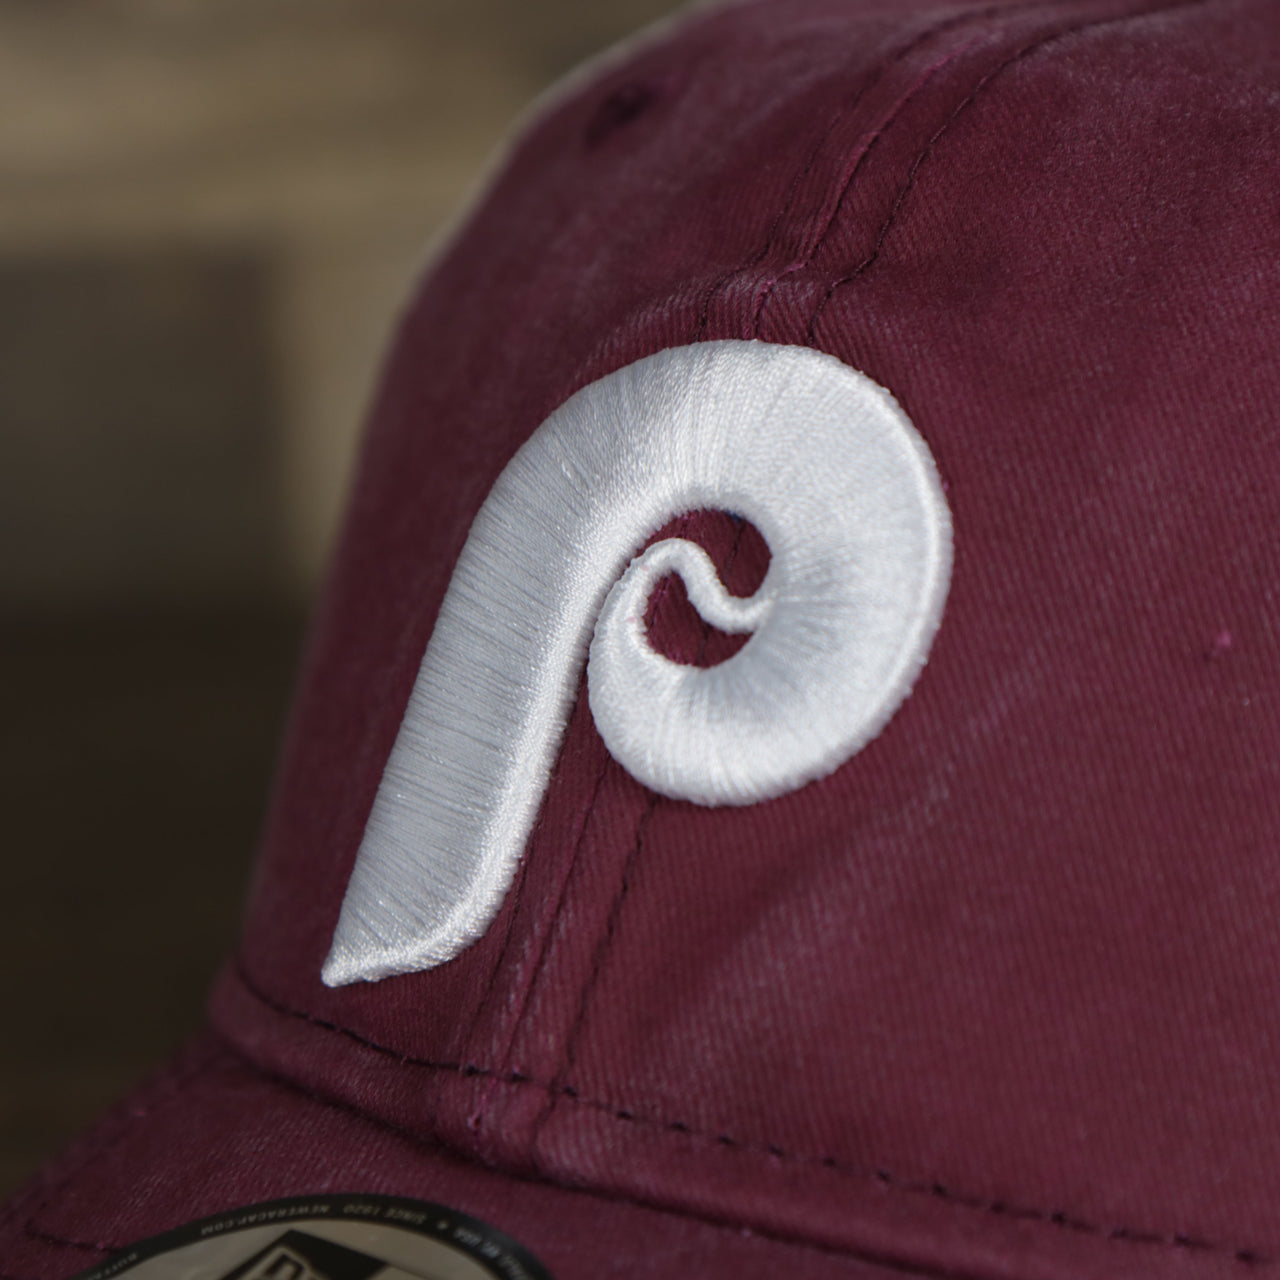 A close up of the Phillies Cooperstown logo on the Philadelphia Phillies Cooperstown New Era 9Twenty Washed Trucker Youth hat